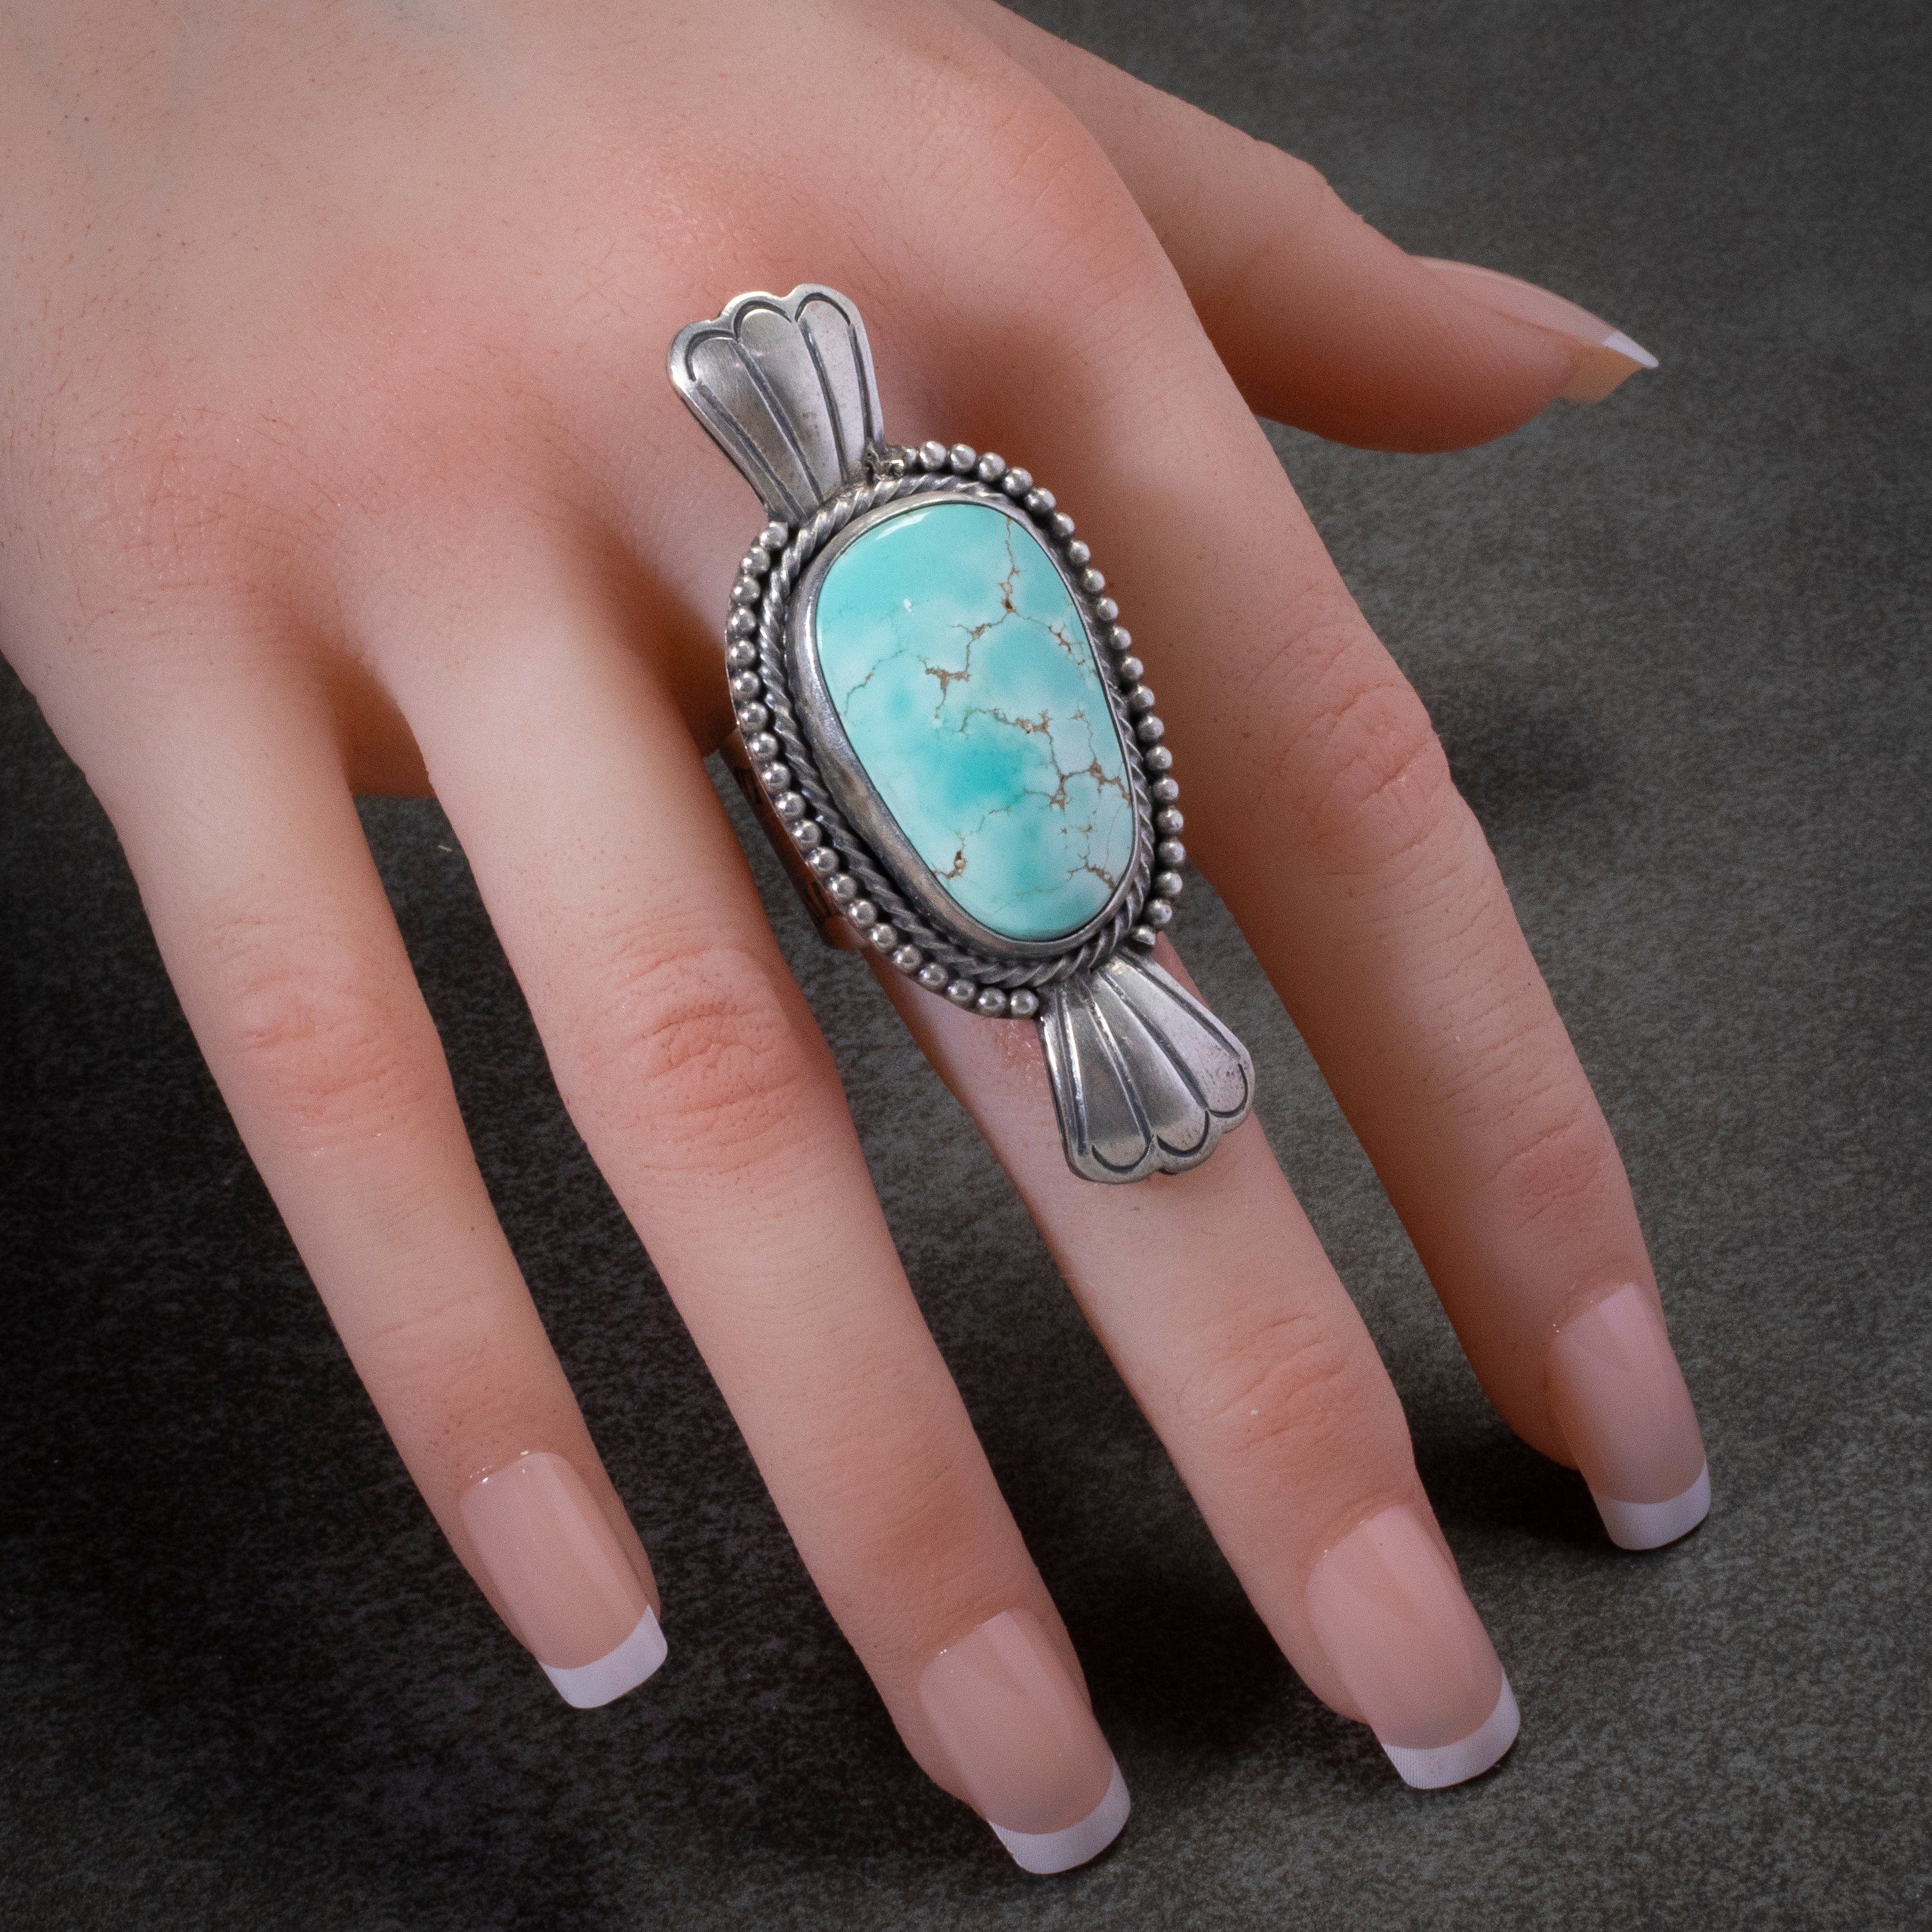 Kalifano Native American Jewelry 7 Marvin McReeves Navajo Carico Lake Turquoise USA Native American Made 925 Sterling Silver Ring NAR1500.020.7